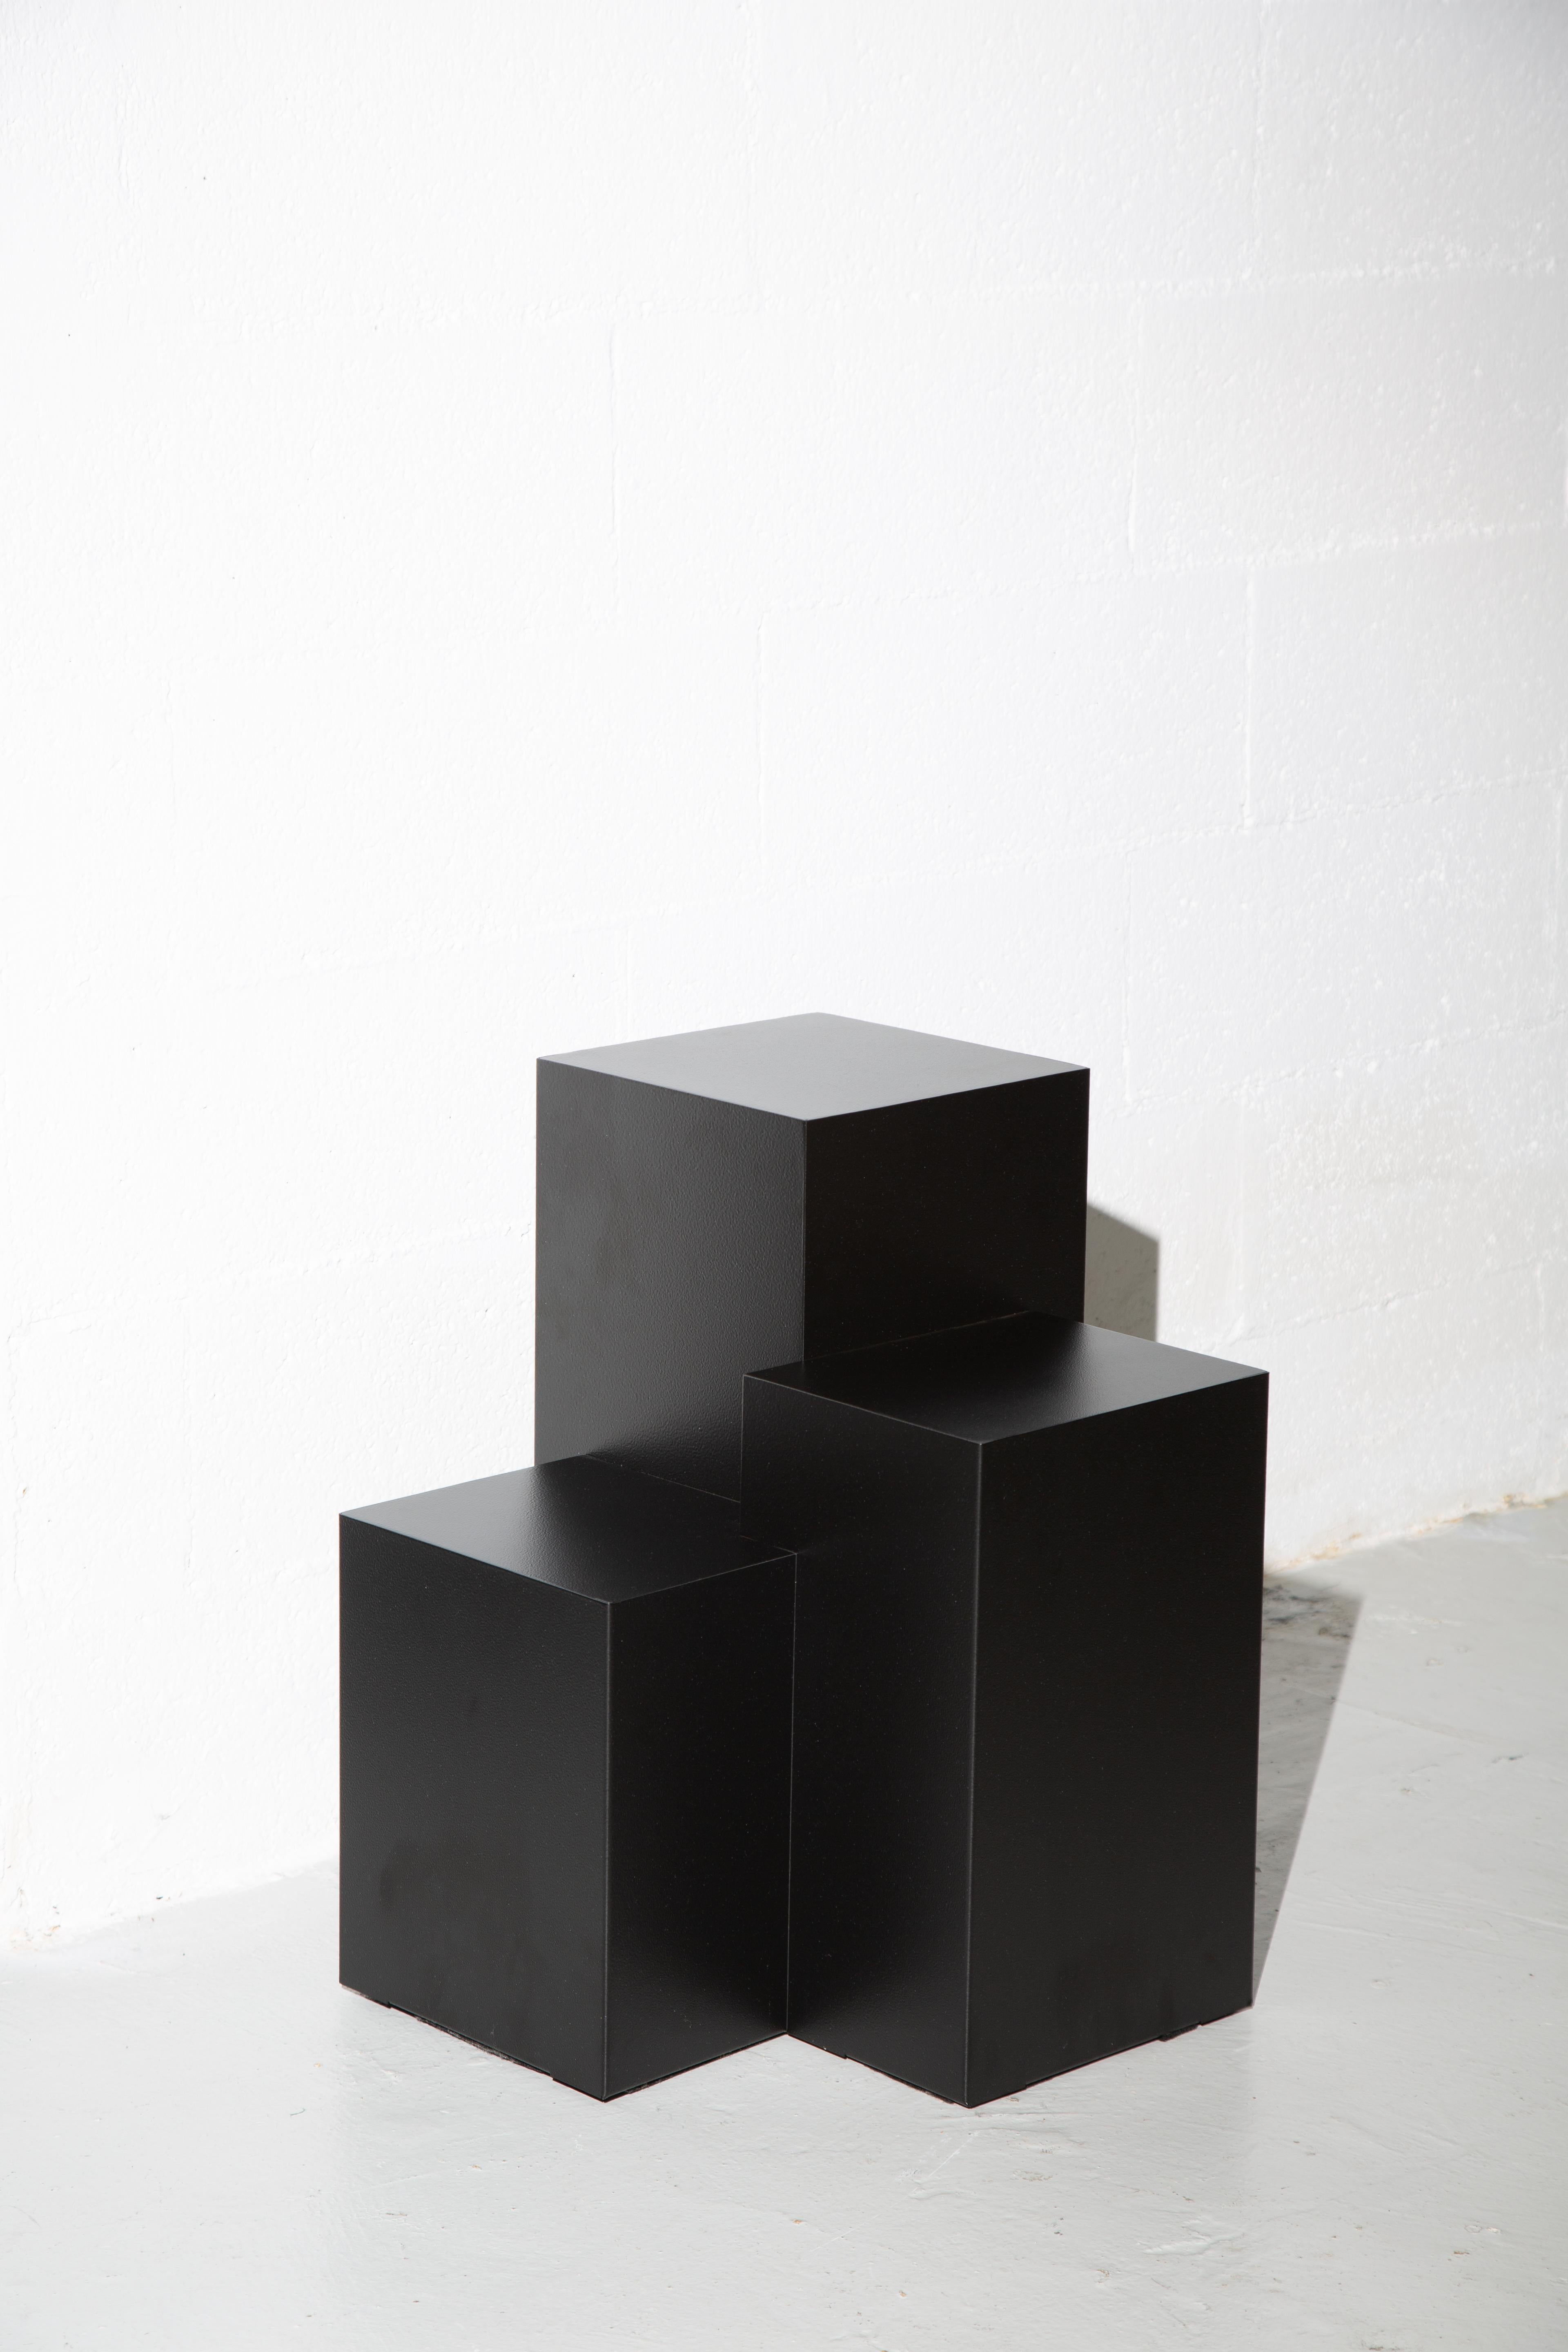 Designed by Spinzi and hand-made in Italy, this essential geometric side table has a strong personality and can easily conjure up images of peaking skylines and towering heights. Sharp and elegant, it is stunning as a plinth for a sculpture, or as a